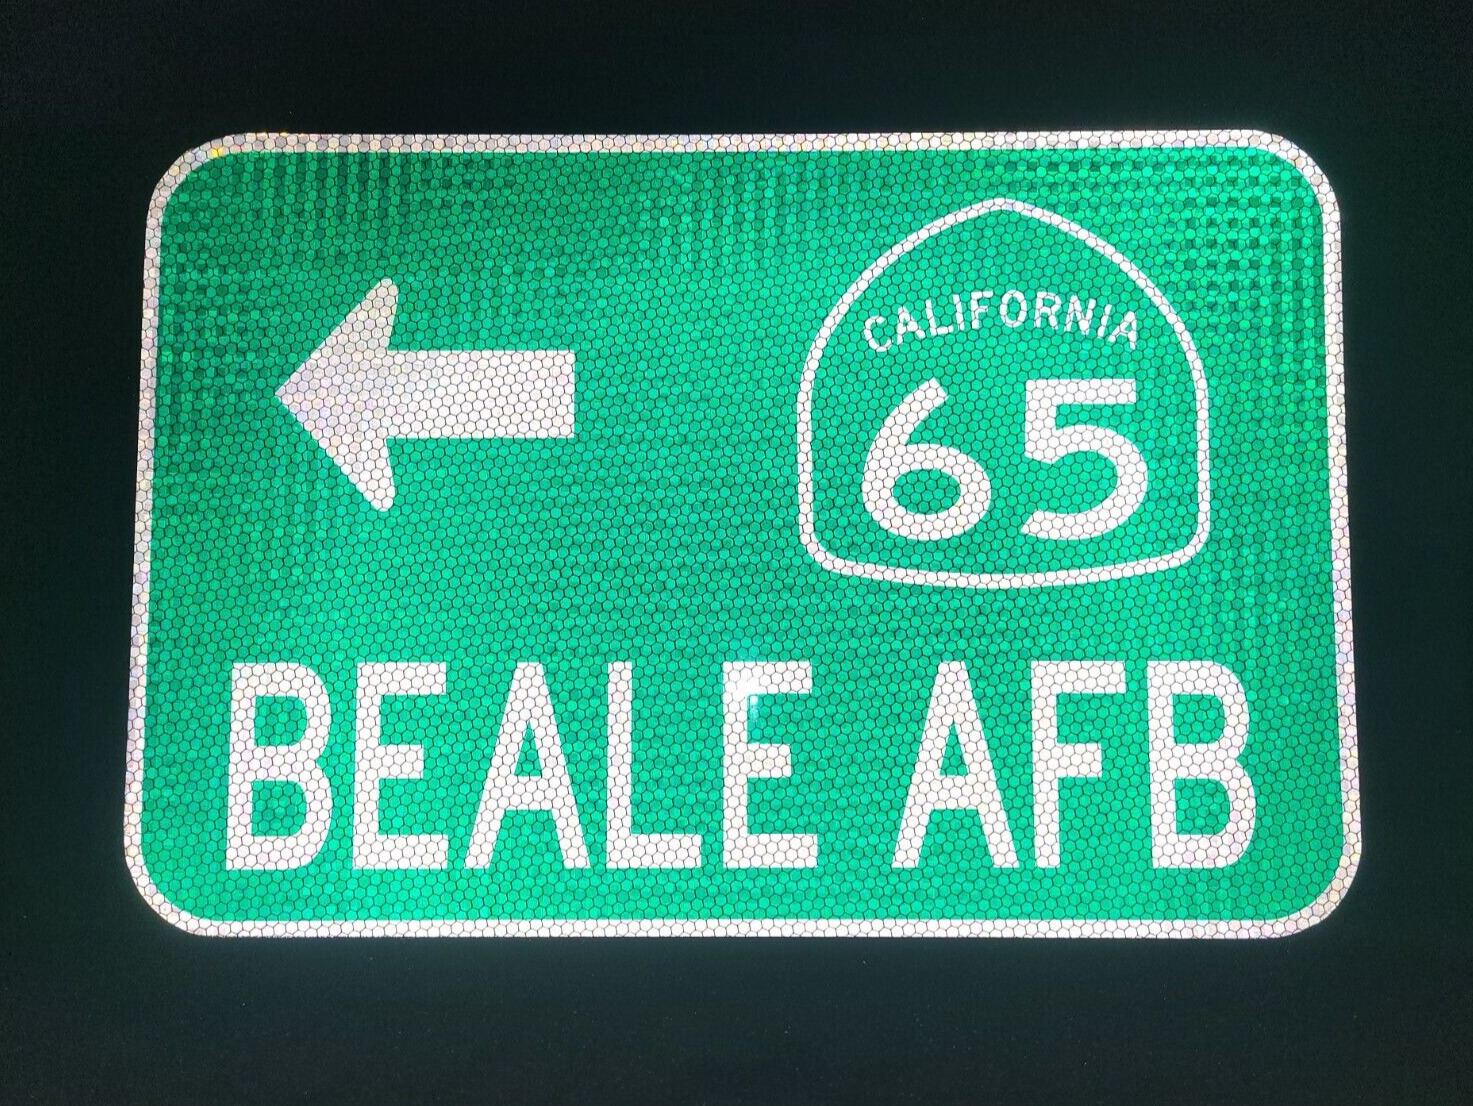 BEALE AFB, California Hwy 65 route road sign 18\